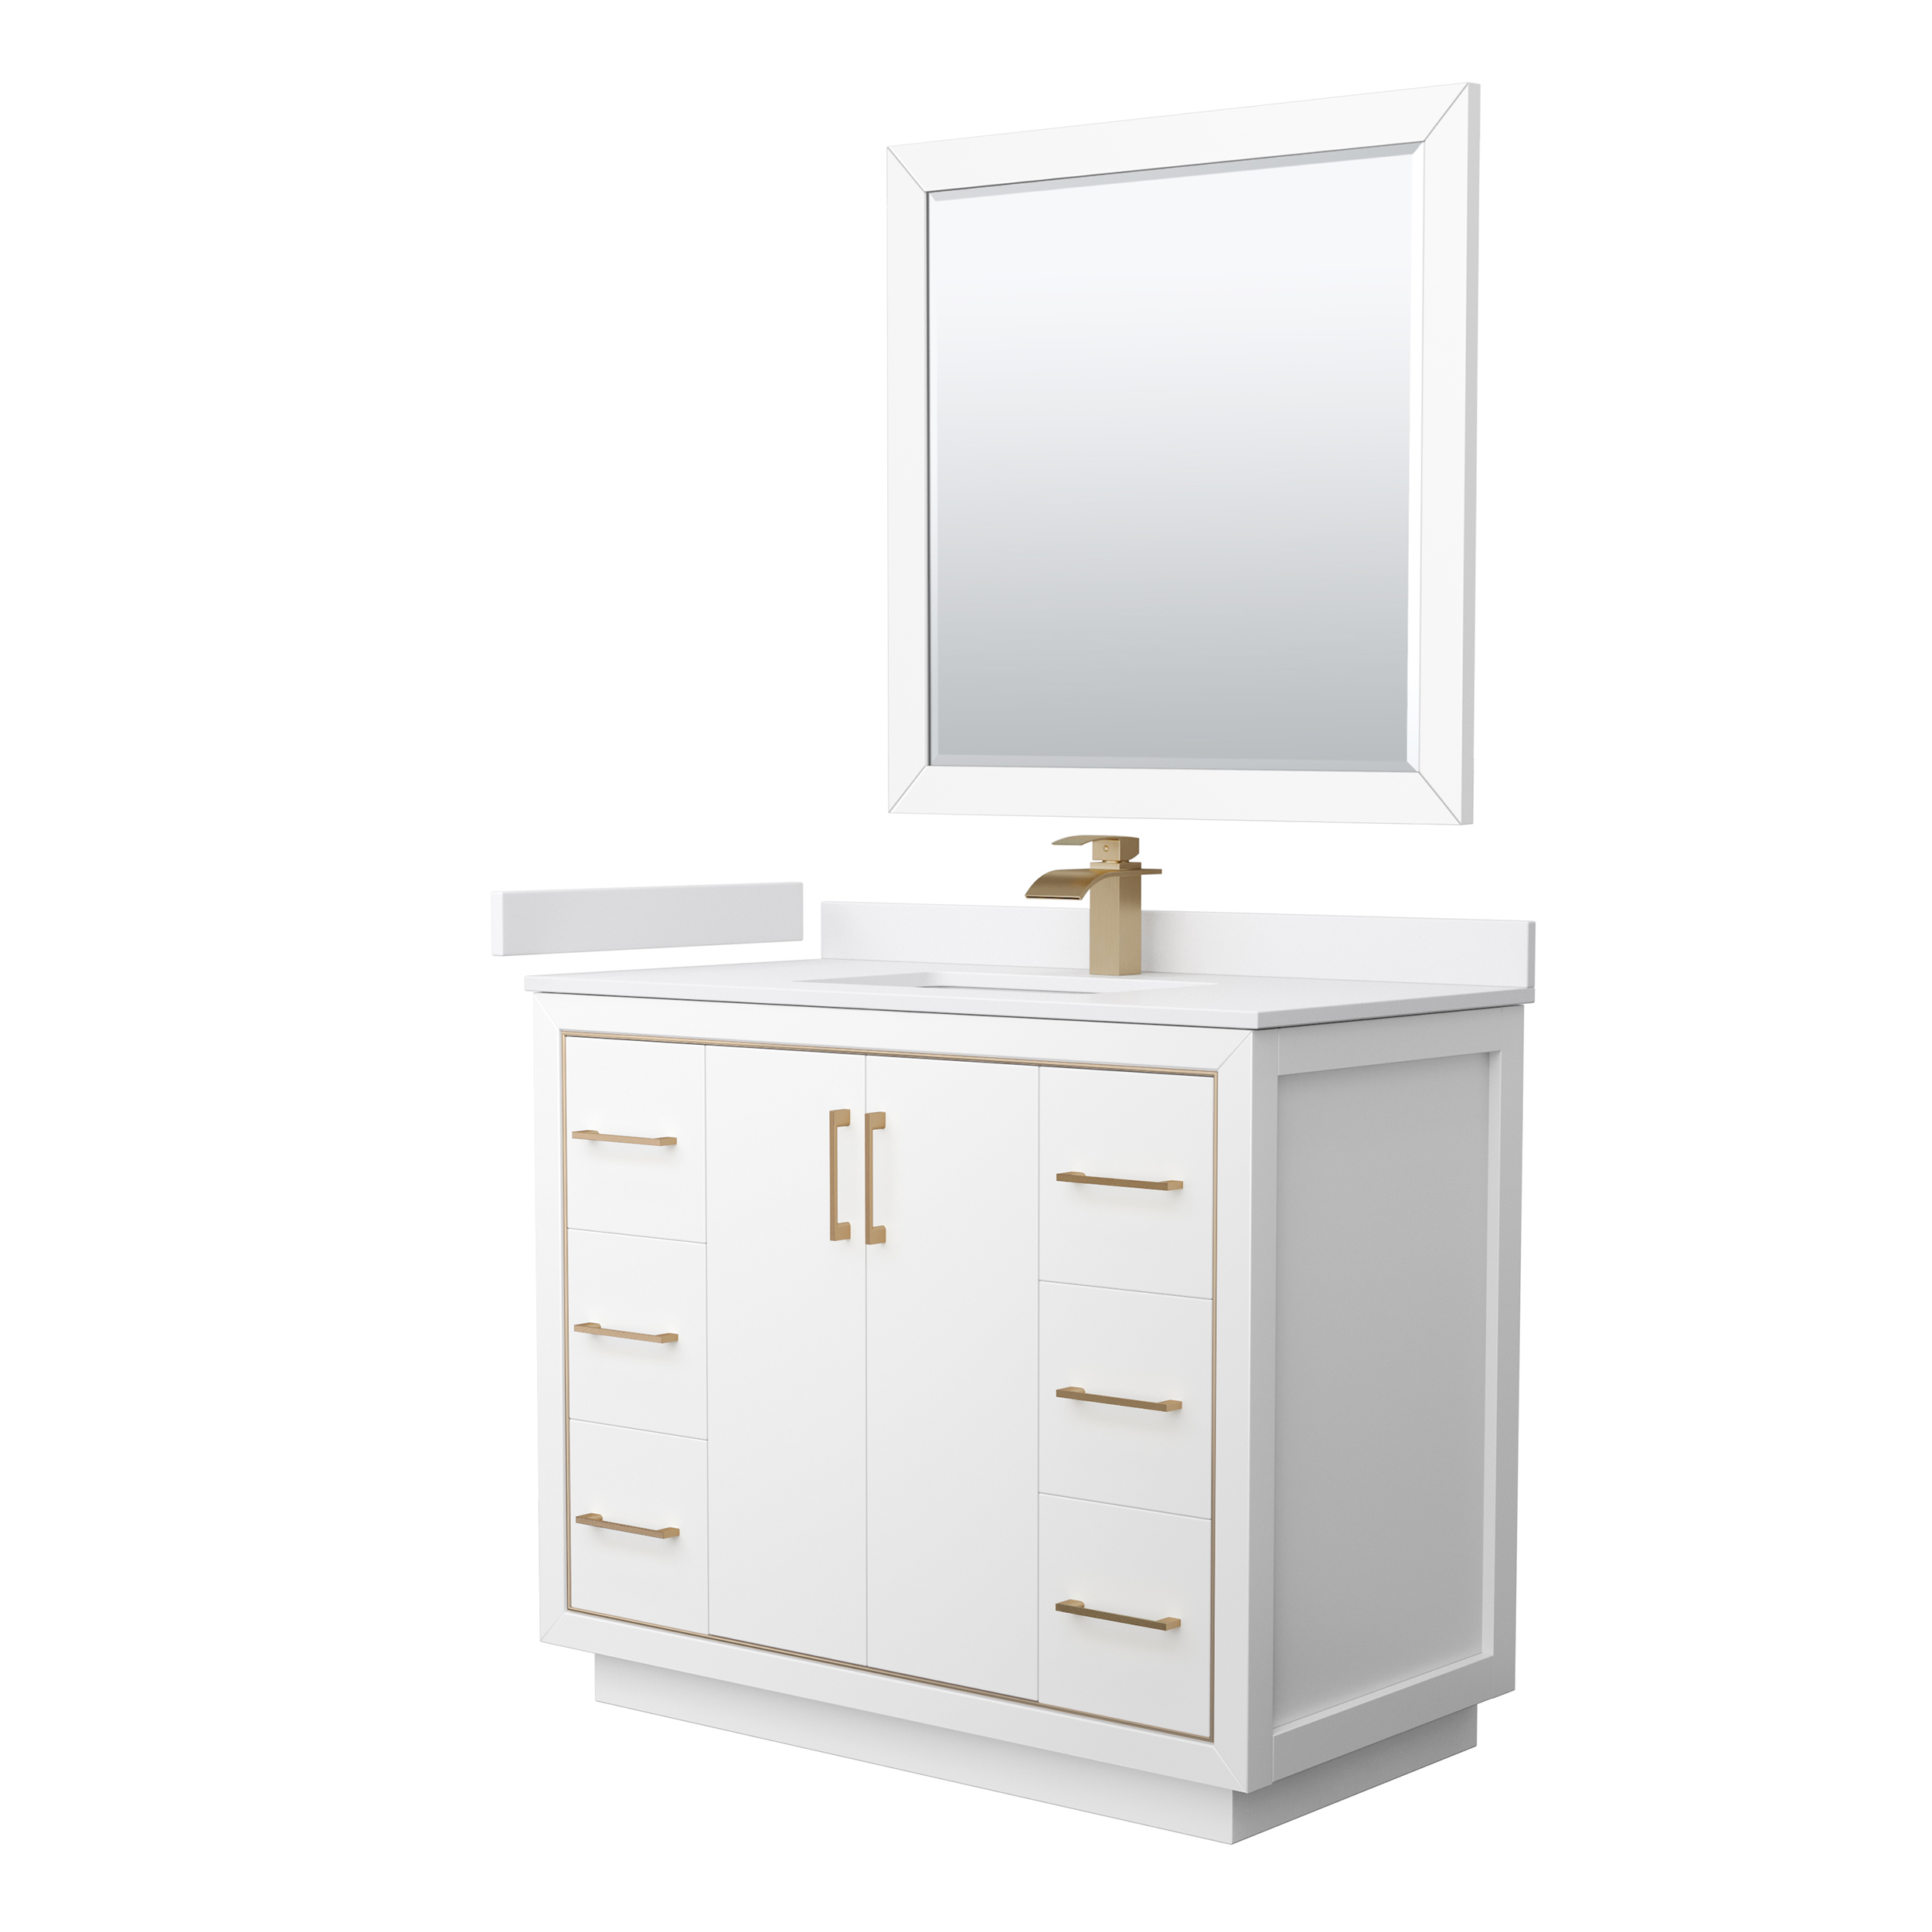 Icon 42" Single Vanity with optional Cultured Marble Counter - White WC-1111-42-SGL-VAN-WHT-